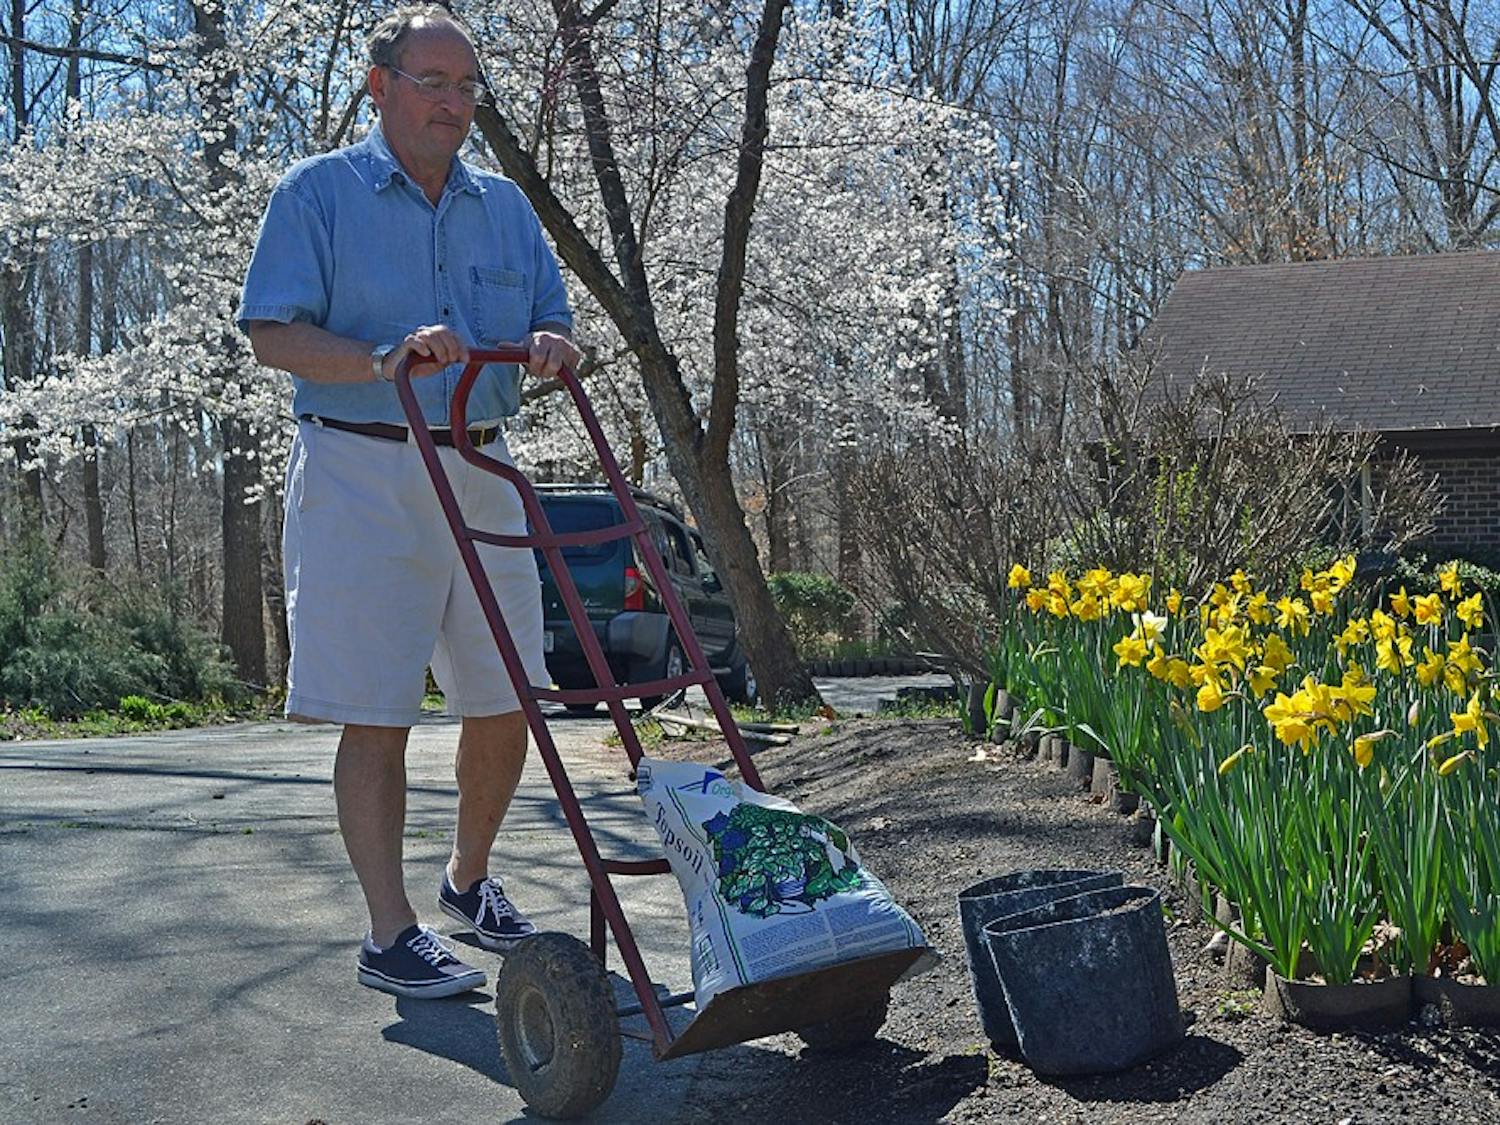 Creighton Moeller, founder of Project Stackhouse, plants flowers outside of his Chapel Hill home to benefit the therapy dog program at UNC Children's Hospital.